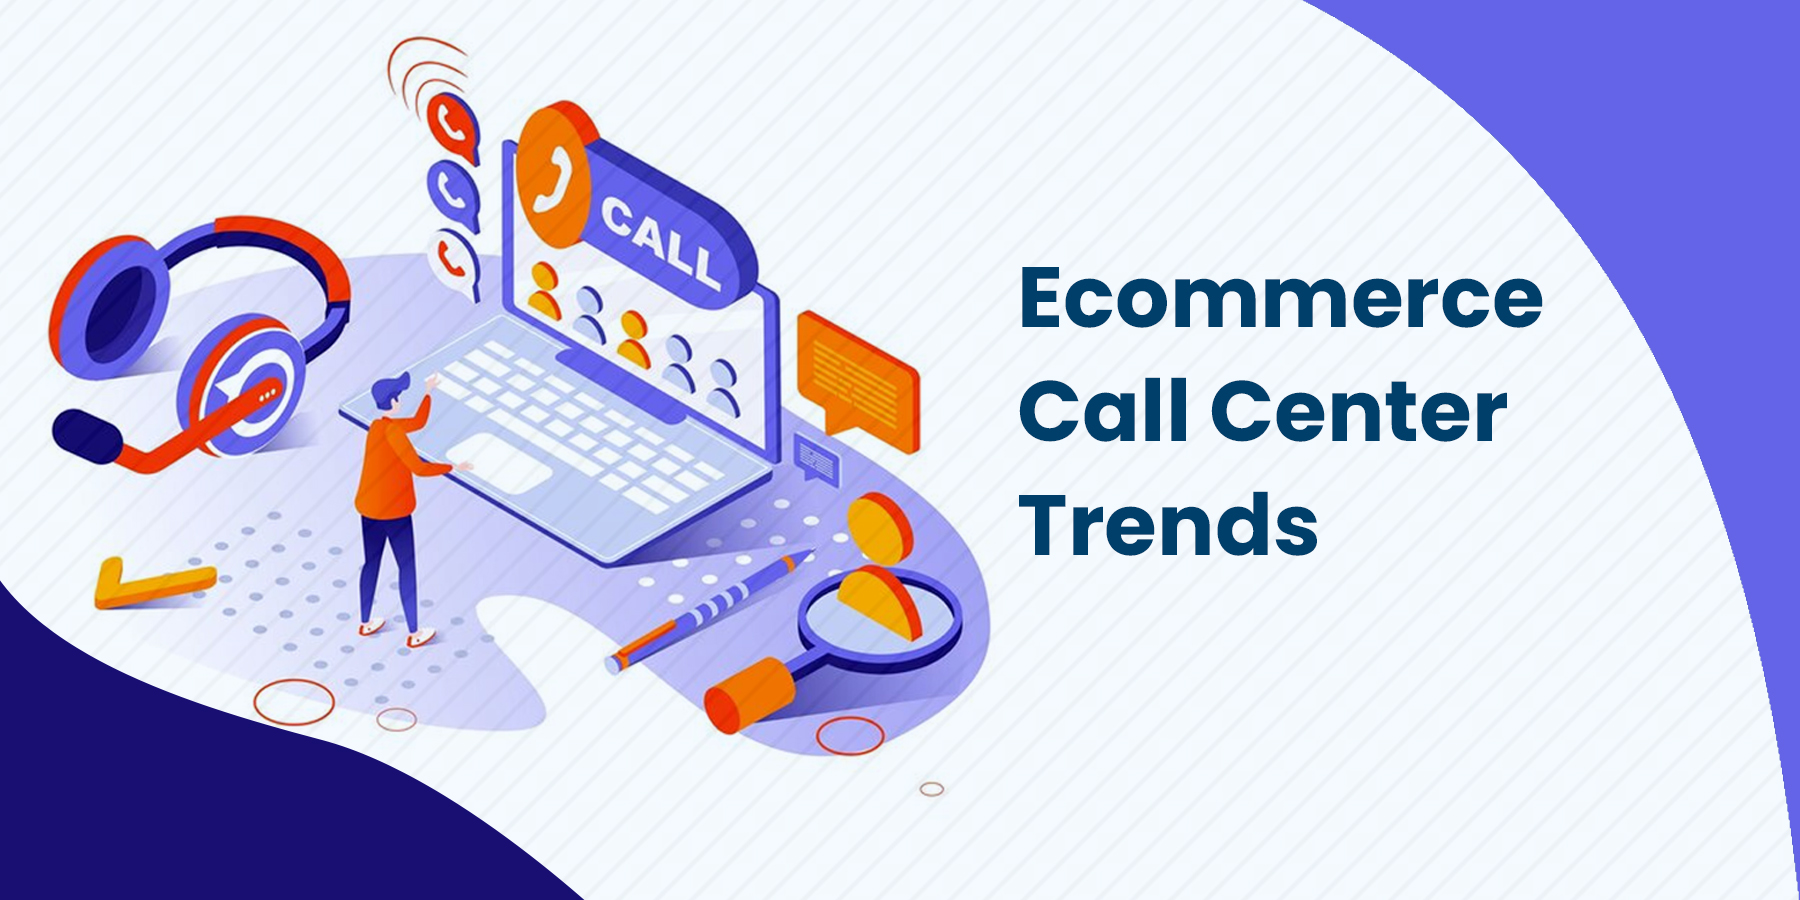 Ecommerce Call Center Trends